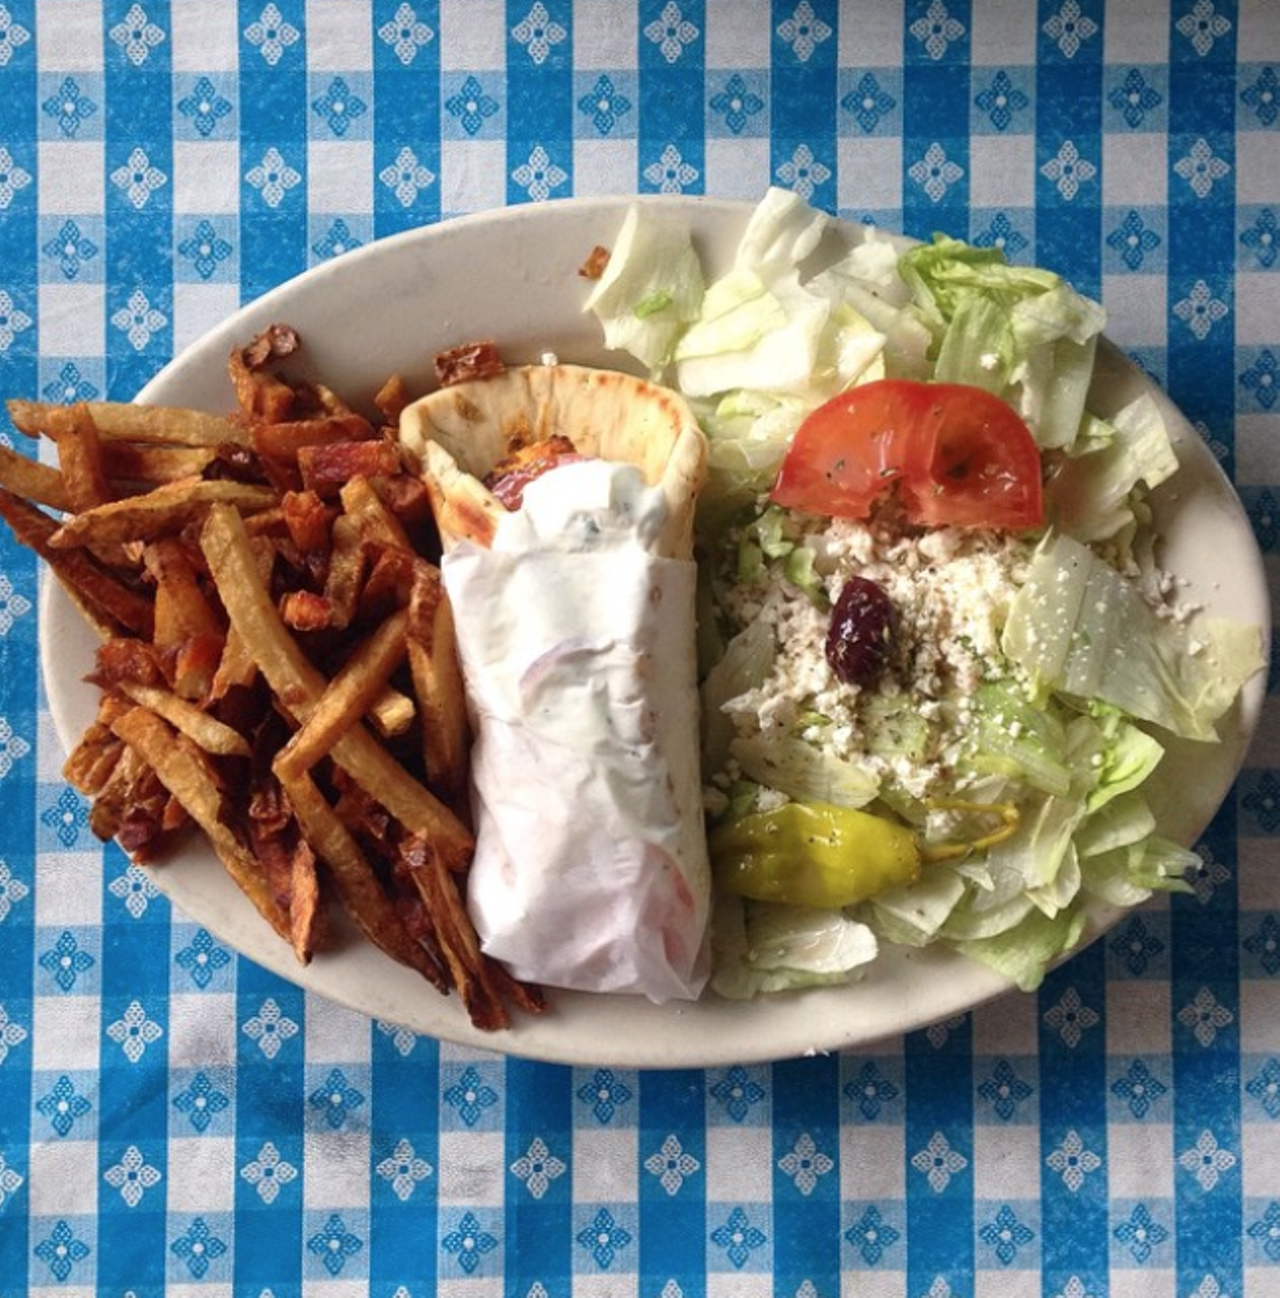 Demo’s Greek Food
Multiple locations, demosgreekfood.com
These lunch specials keep it simple: choose from the traditional gyro sandwich or the chicken option. Your meal is complete with Greek salad, fries and a drink.
Photo via Instagram / gabo.tx